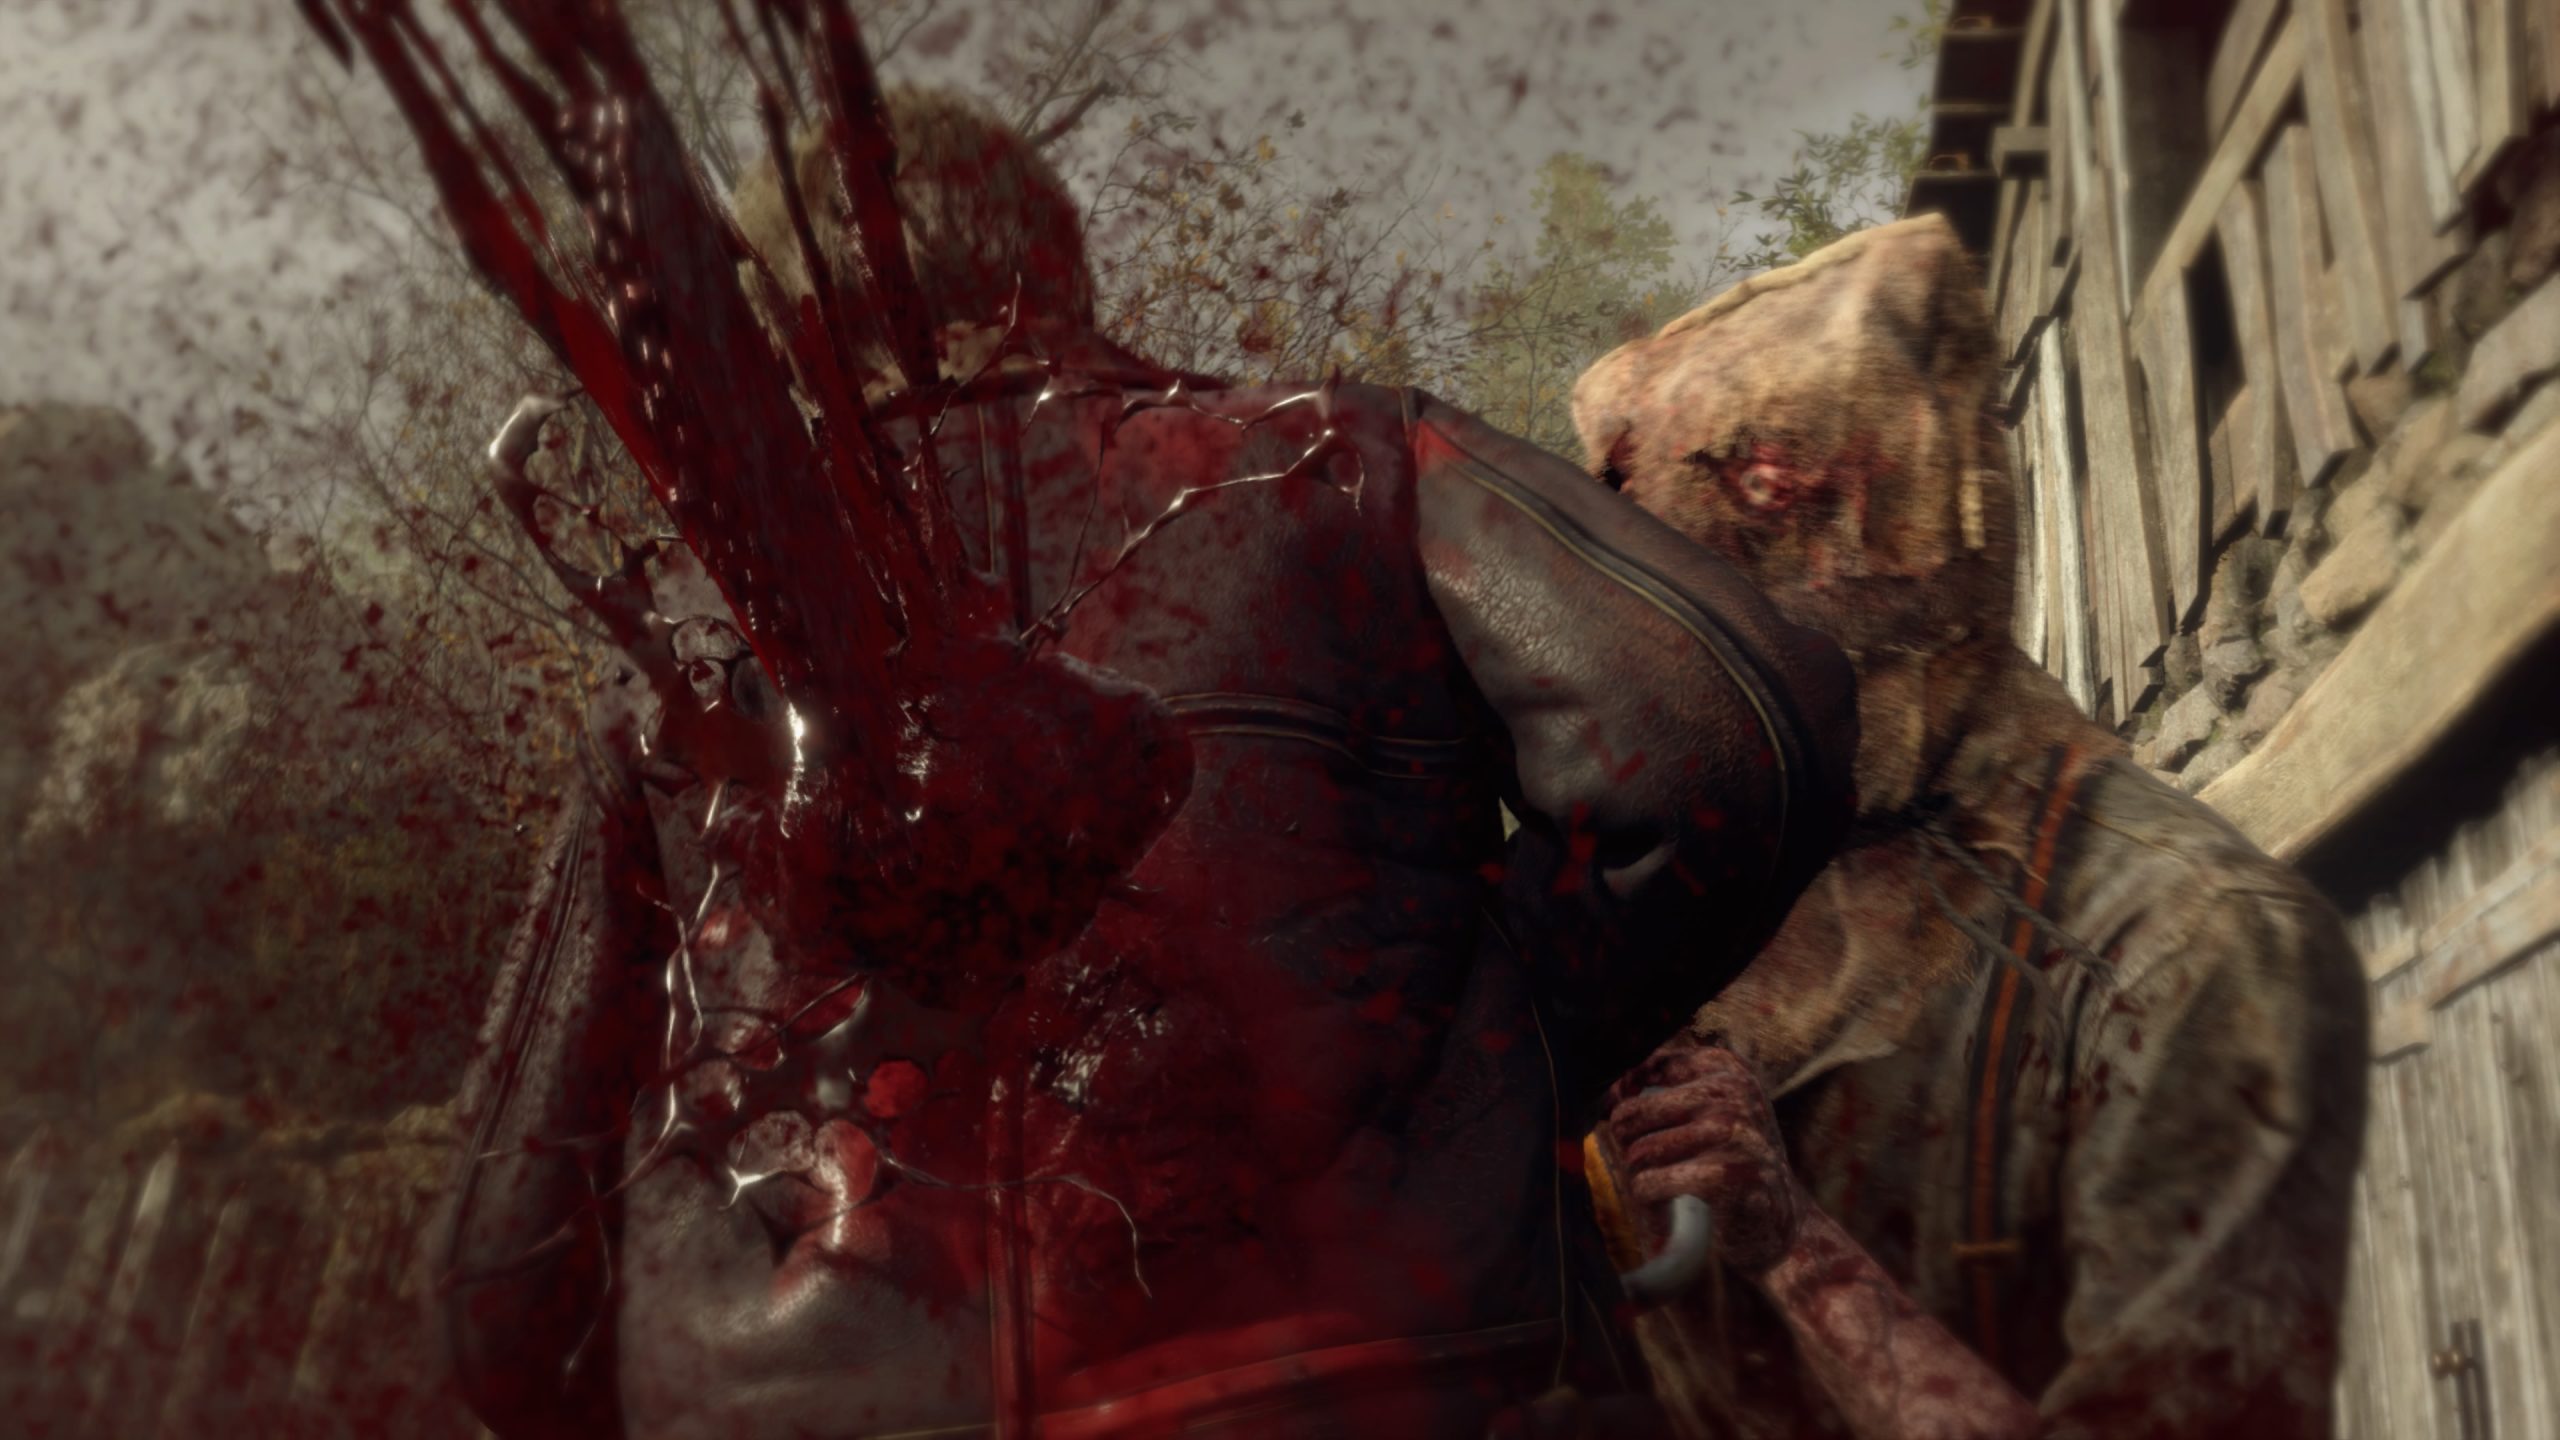 The Resident Evil 4 remake features tons of bloody death scenes.